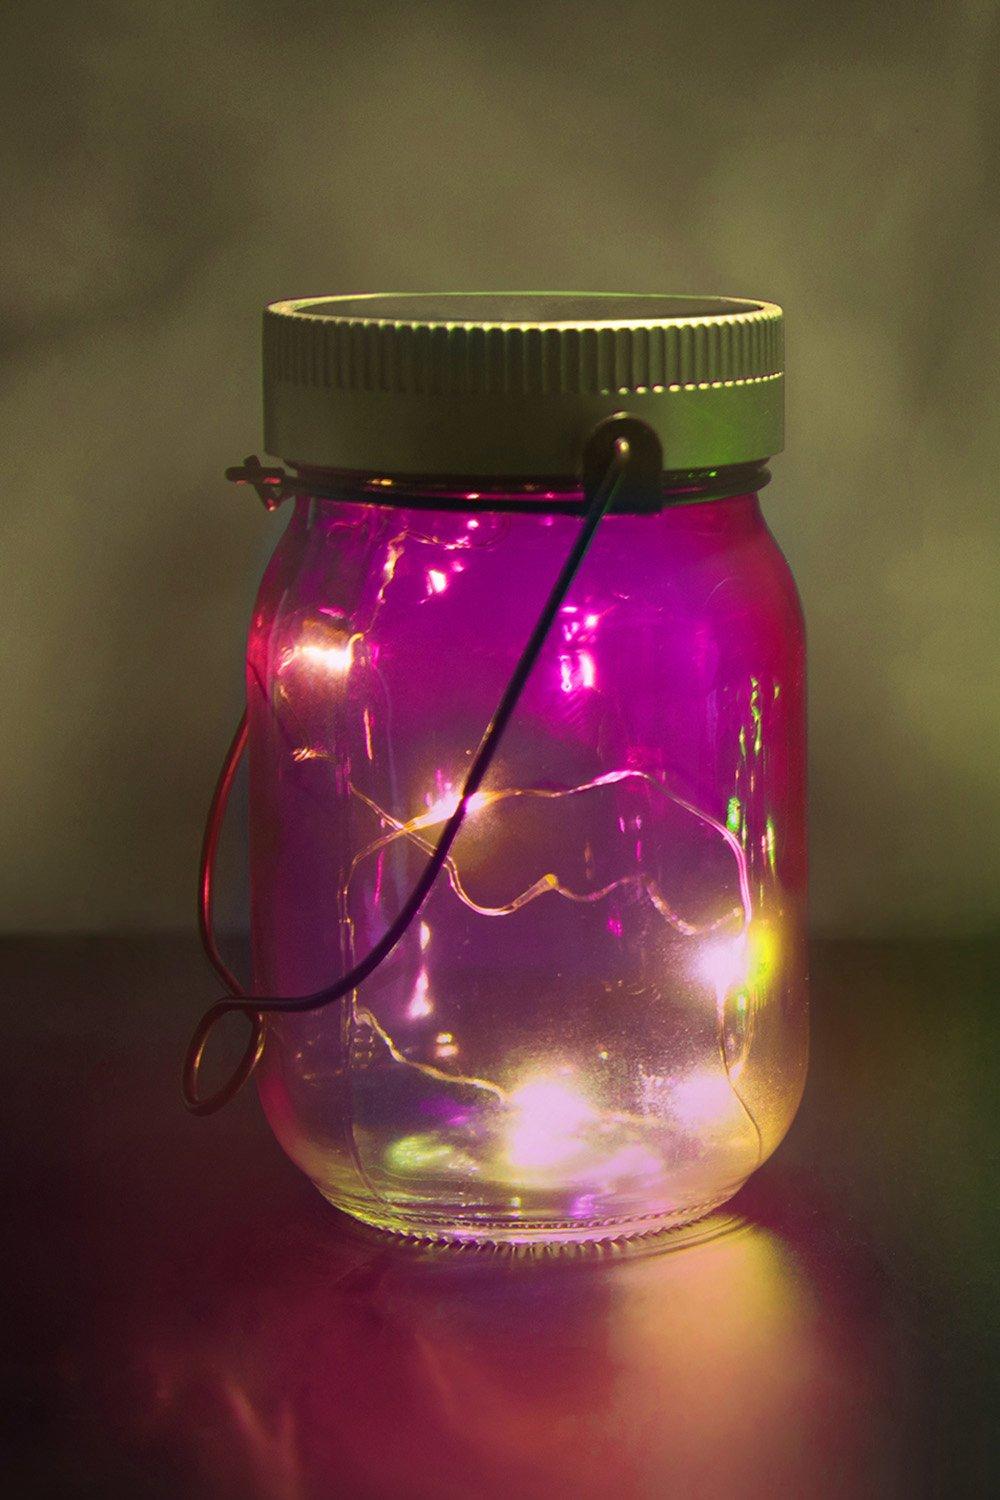 Find Me A Gift Solar Fairy Jars